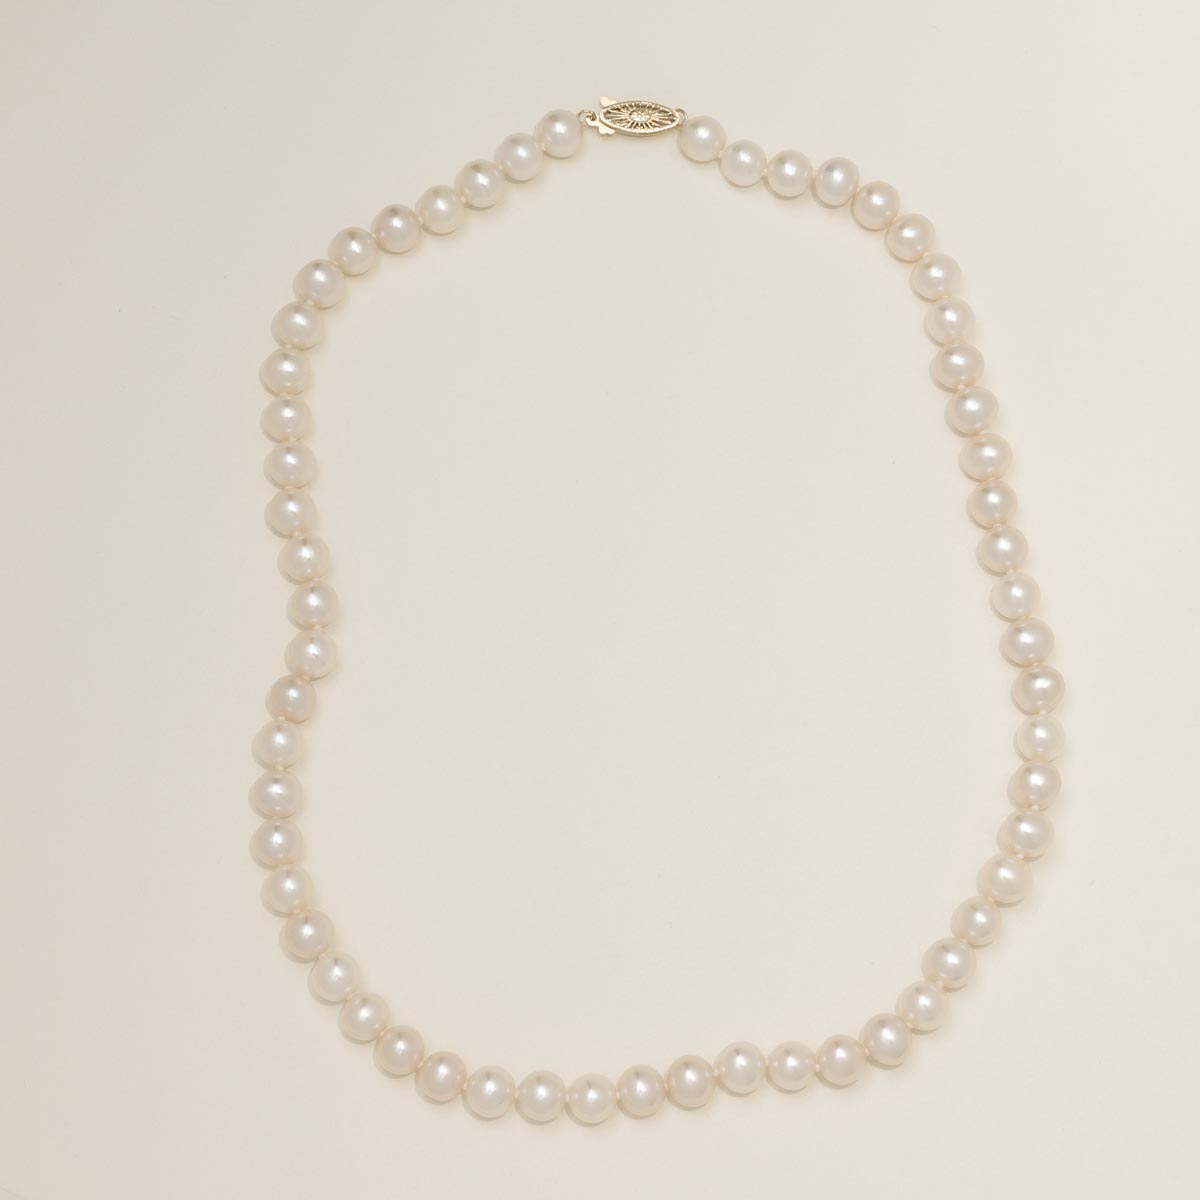 Mastoloni Cultured Freshwater Pearl Strand Necklace in 14kt Yellow Gold (7.5-8mm pearls)